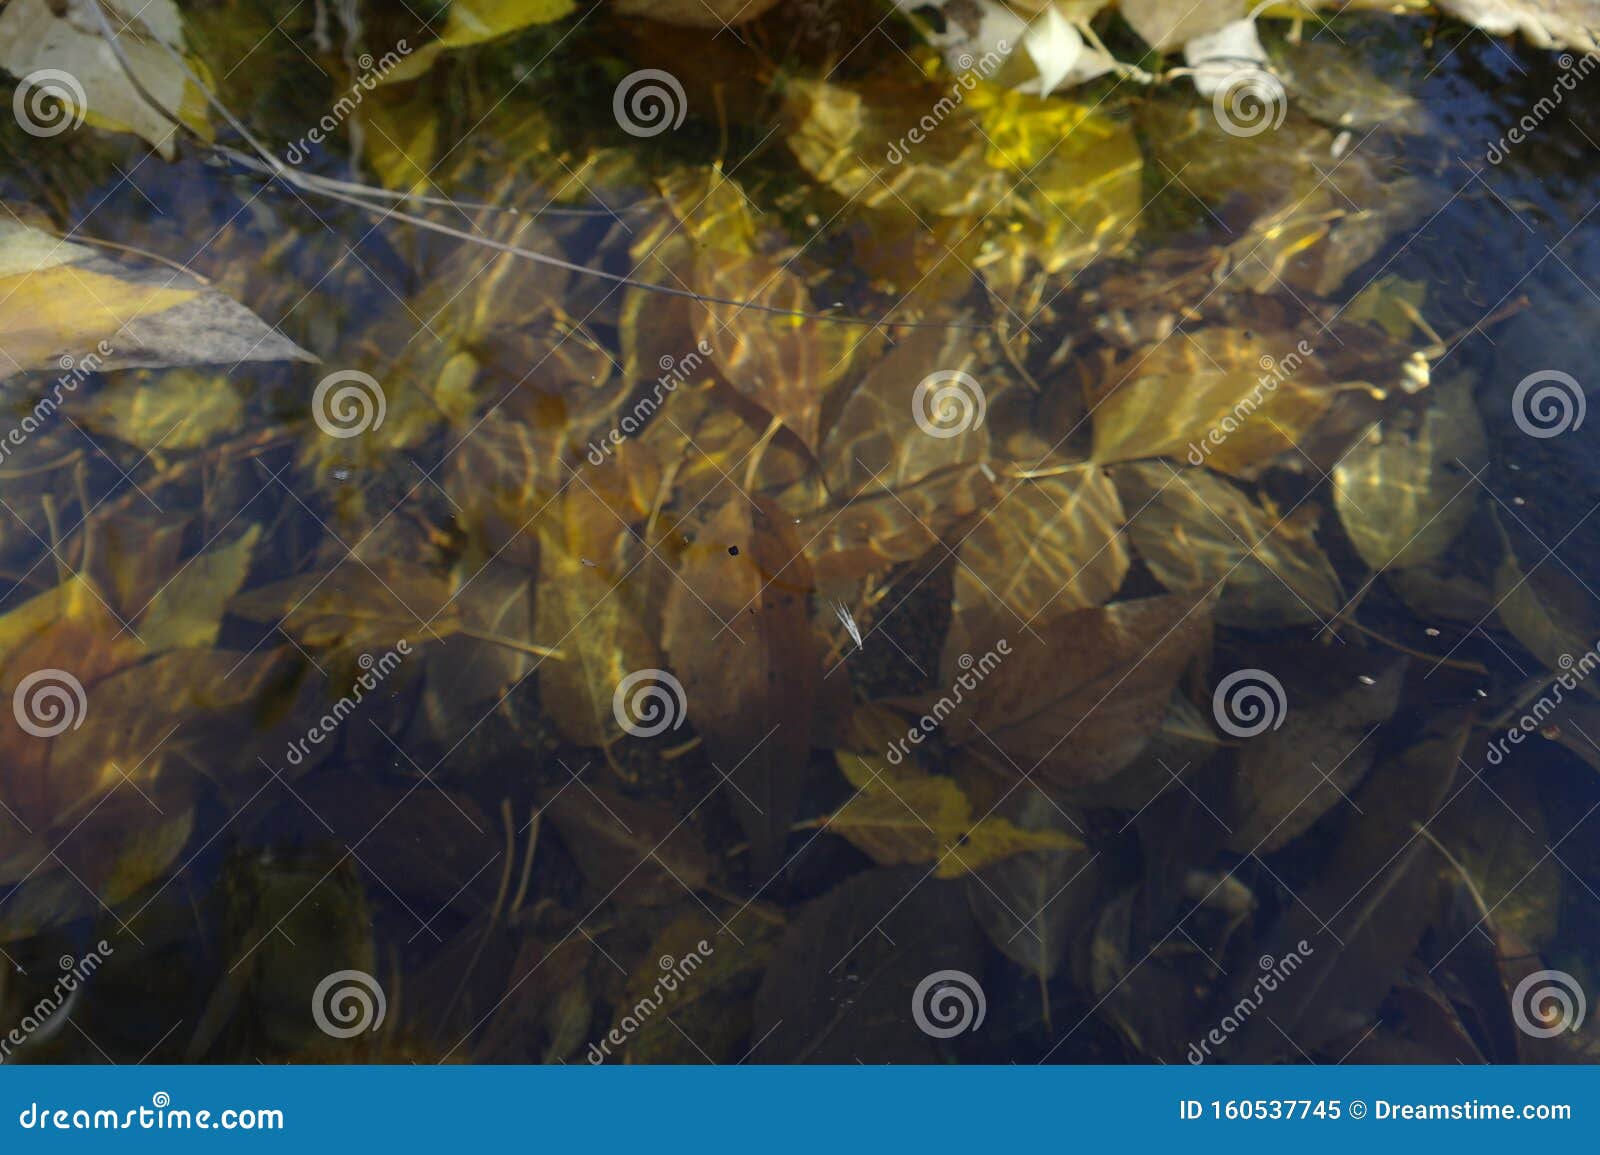 Autumn Leaves Under Water. Continuous Melancholy Stock Image - Image of ...